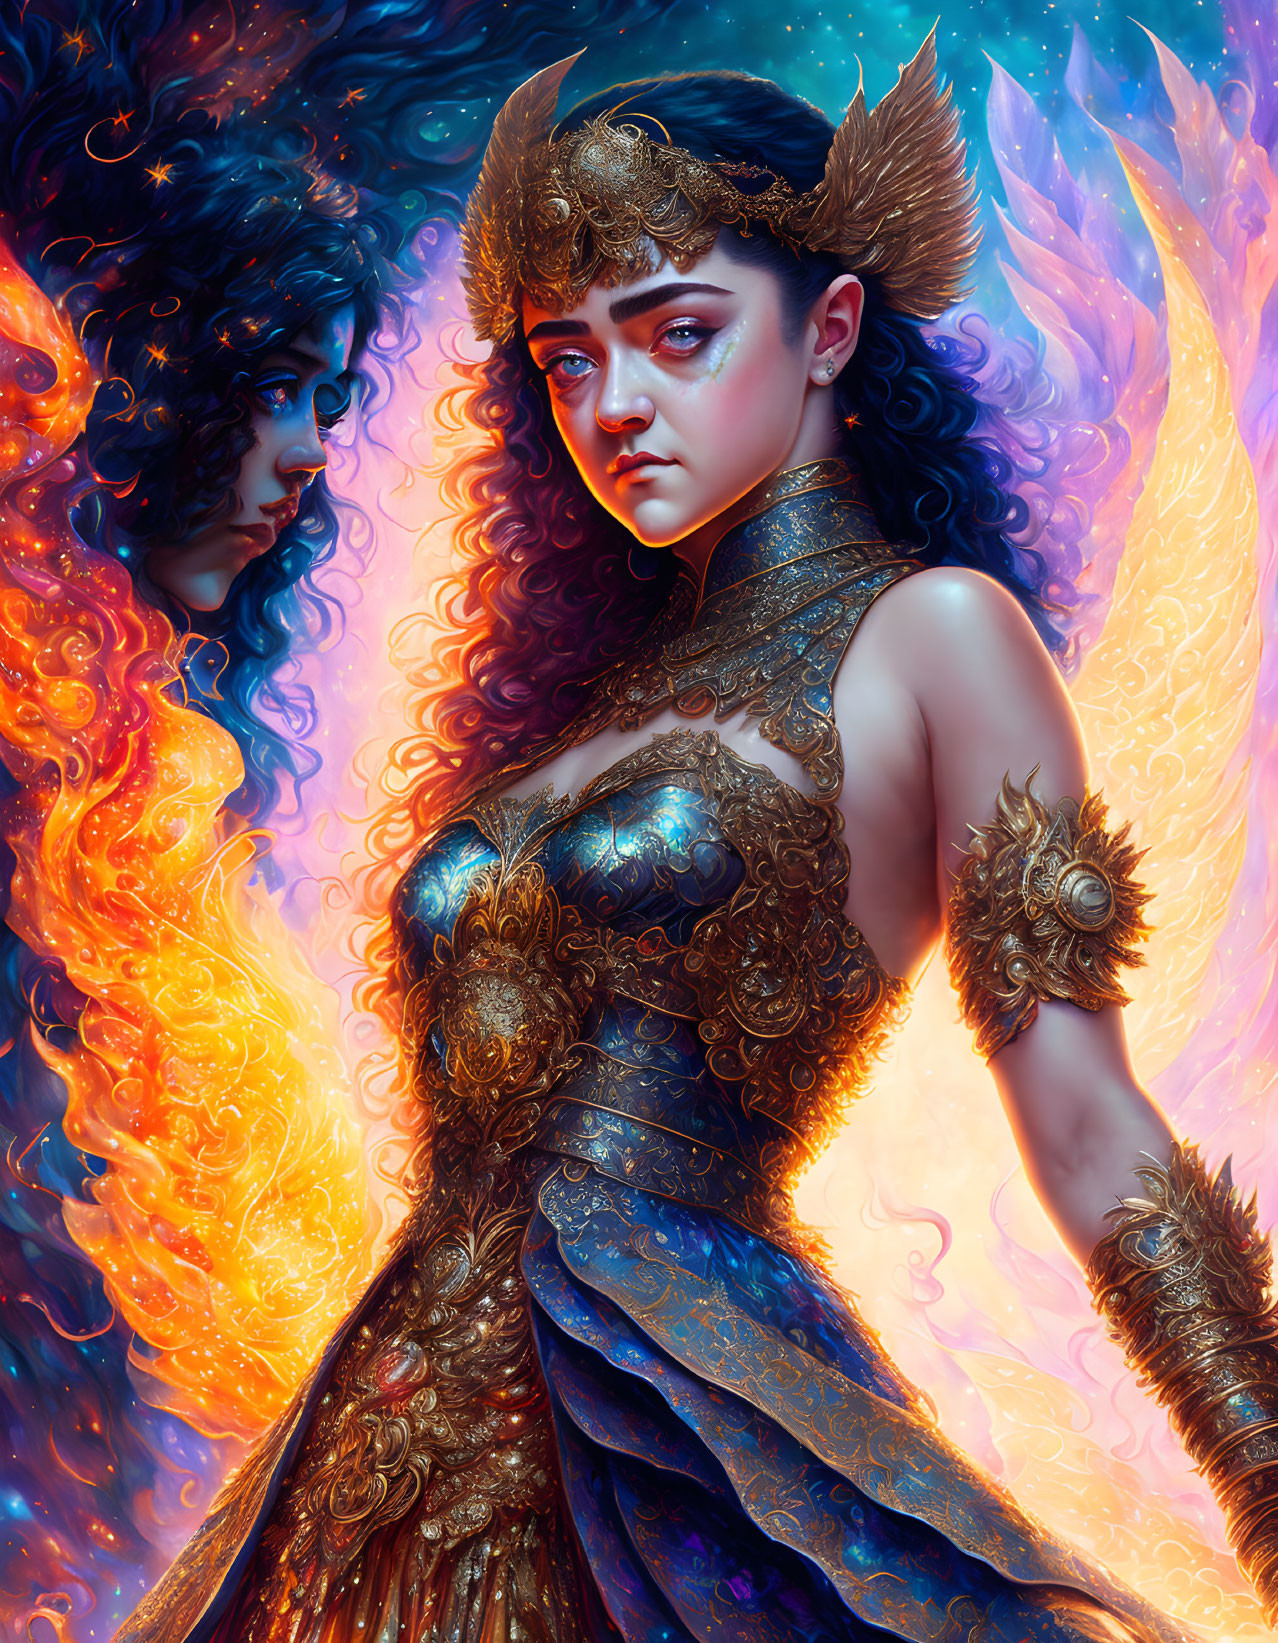 Fantasy painting: Woman in golden armor with phoenix wings in fiery mystical setting